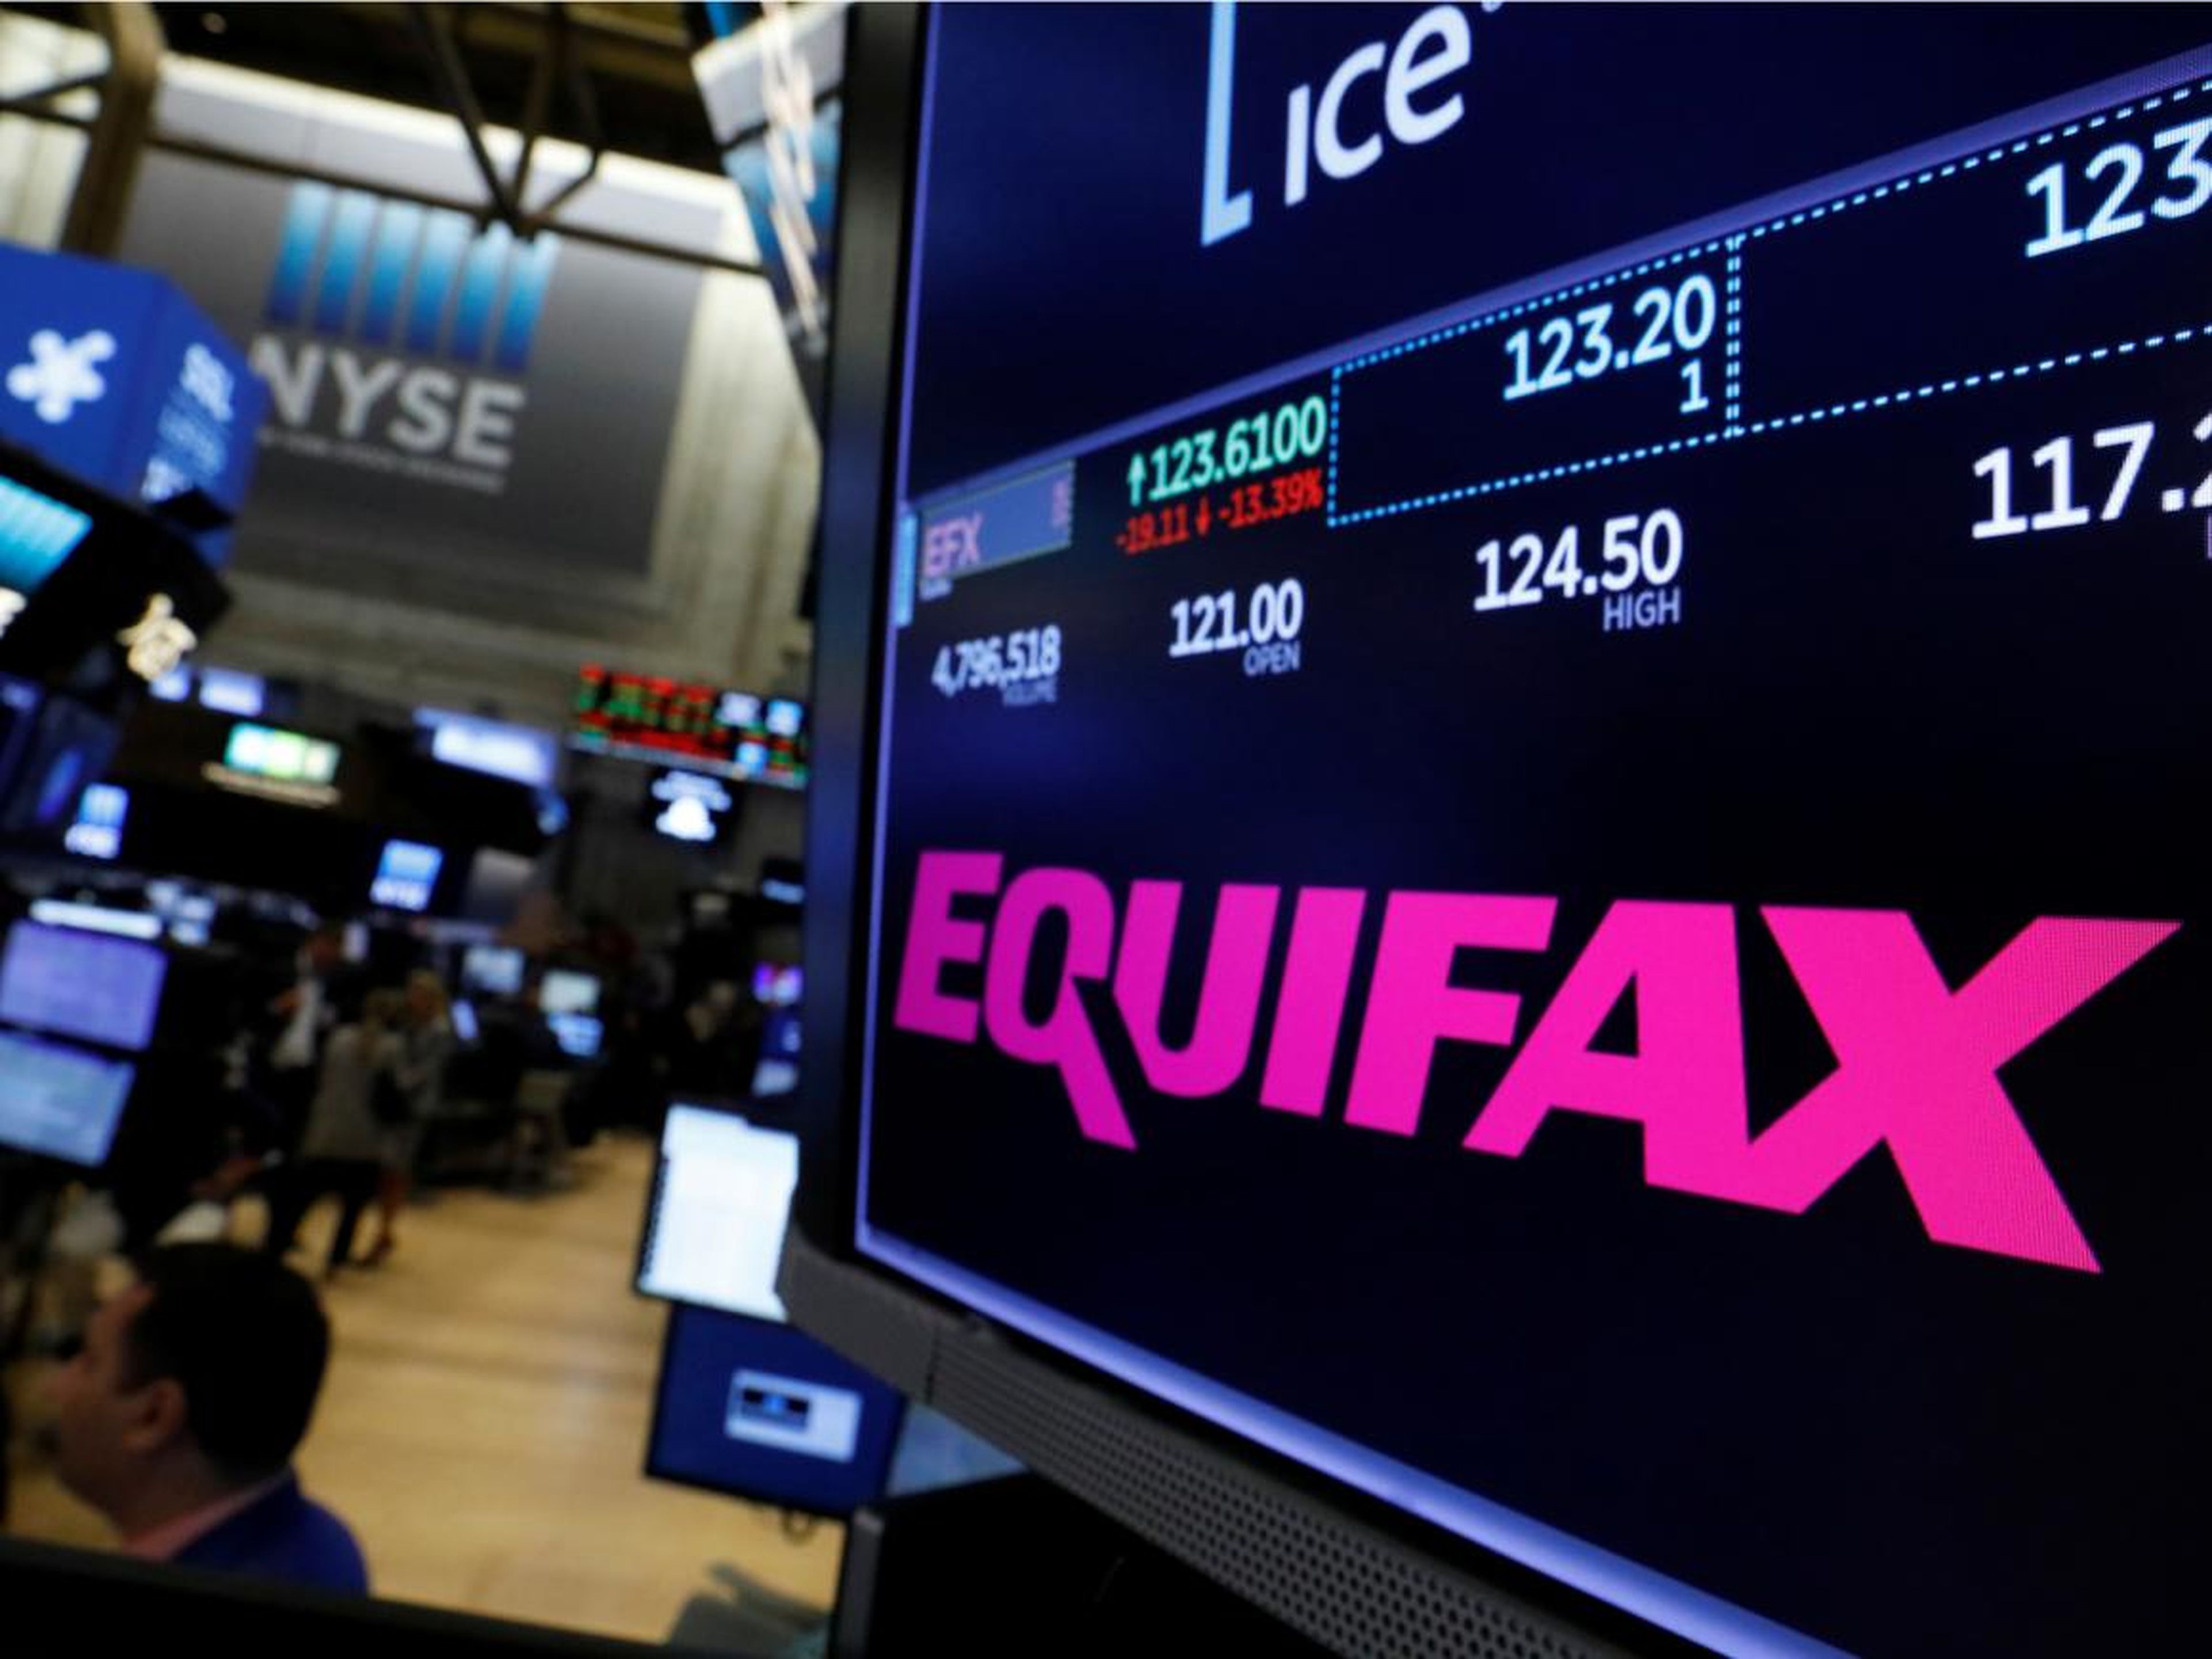 9. A 2017 data breach targeted Equifax, impacting as many as 143 million users.